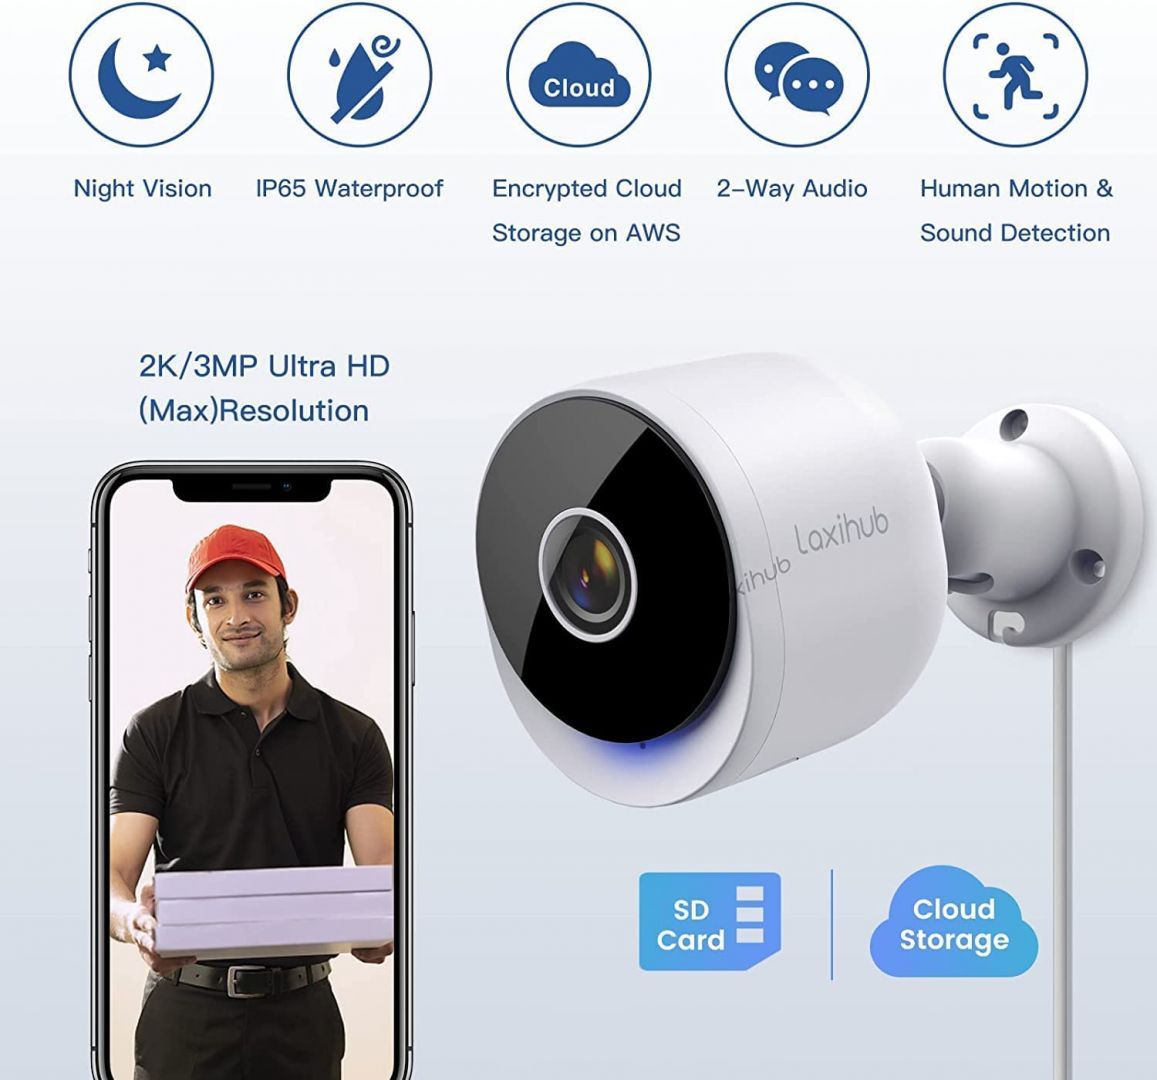 Laxihub O2 Outdoor Weather-Proof Wi-Fi Bullet Camera